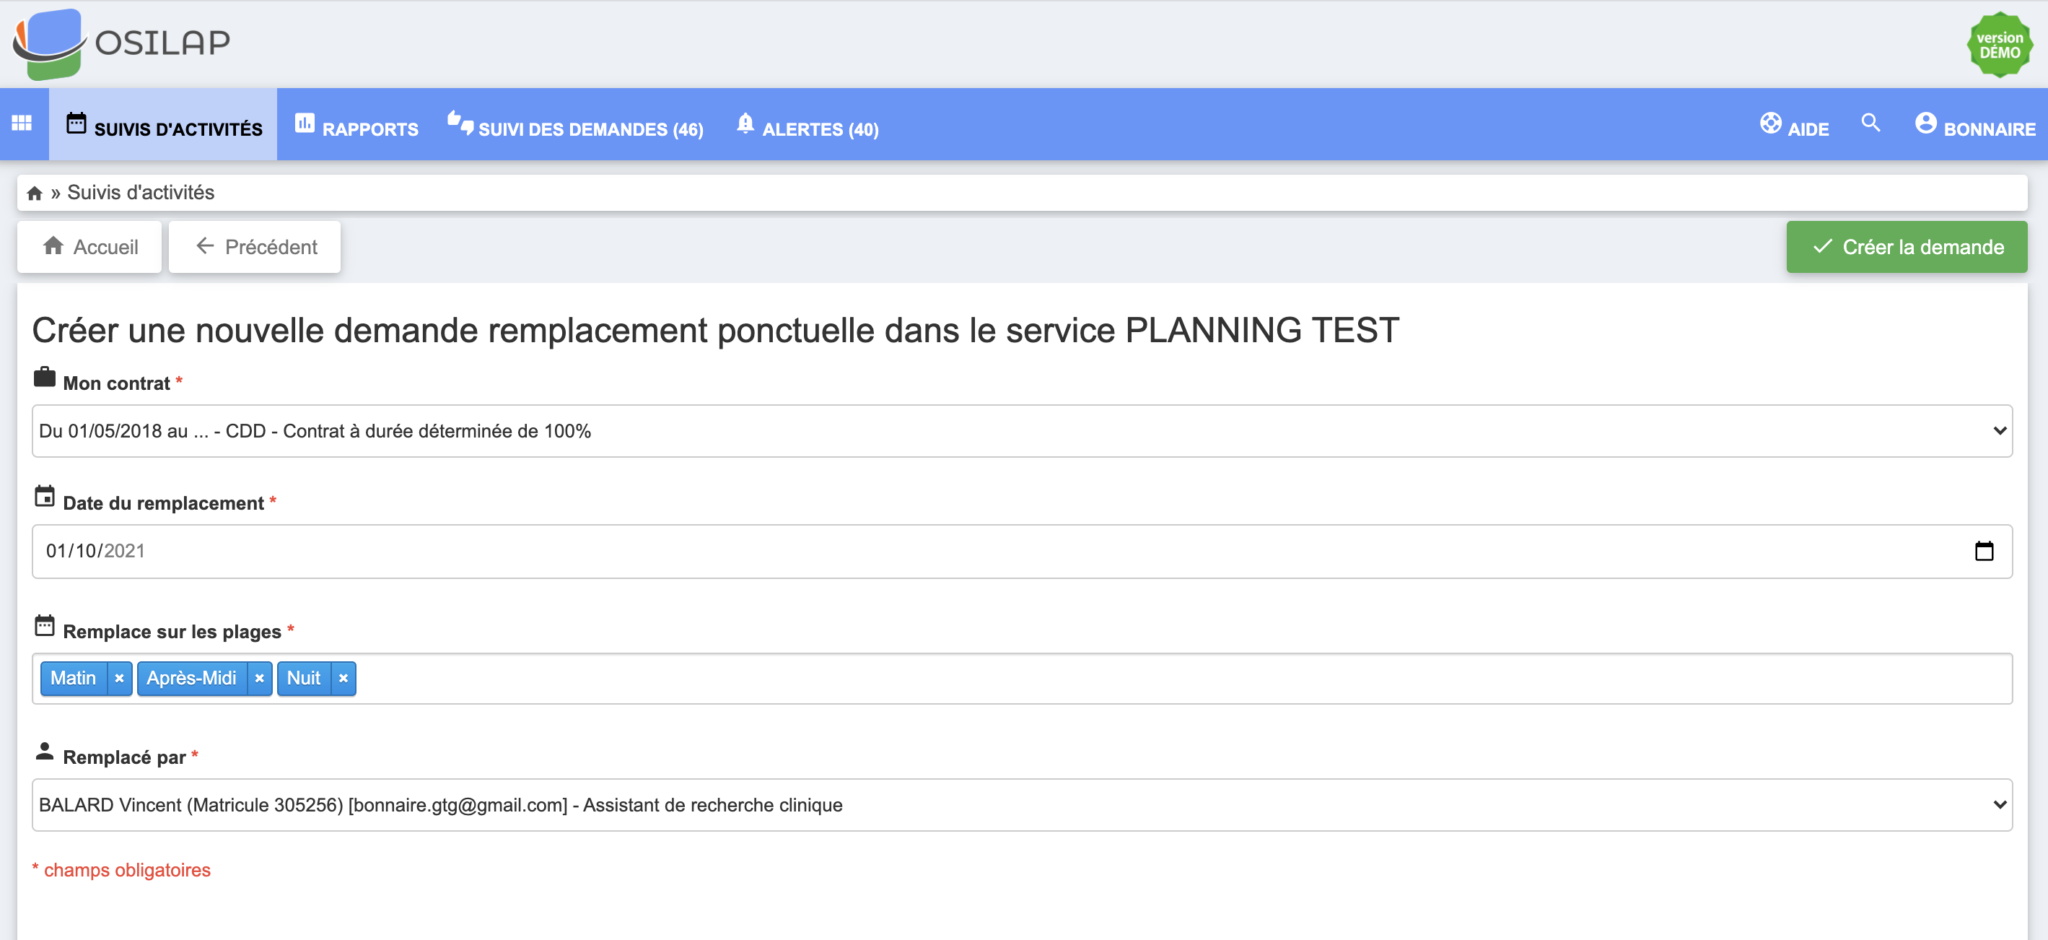 OSILAP_PLANNING_REMPLACEMENT_FORM